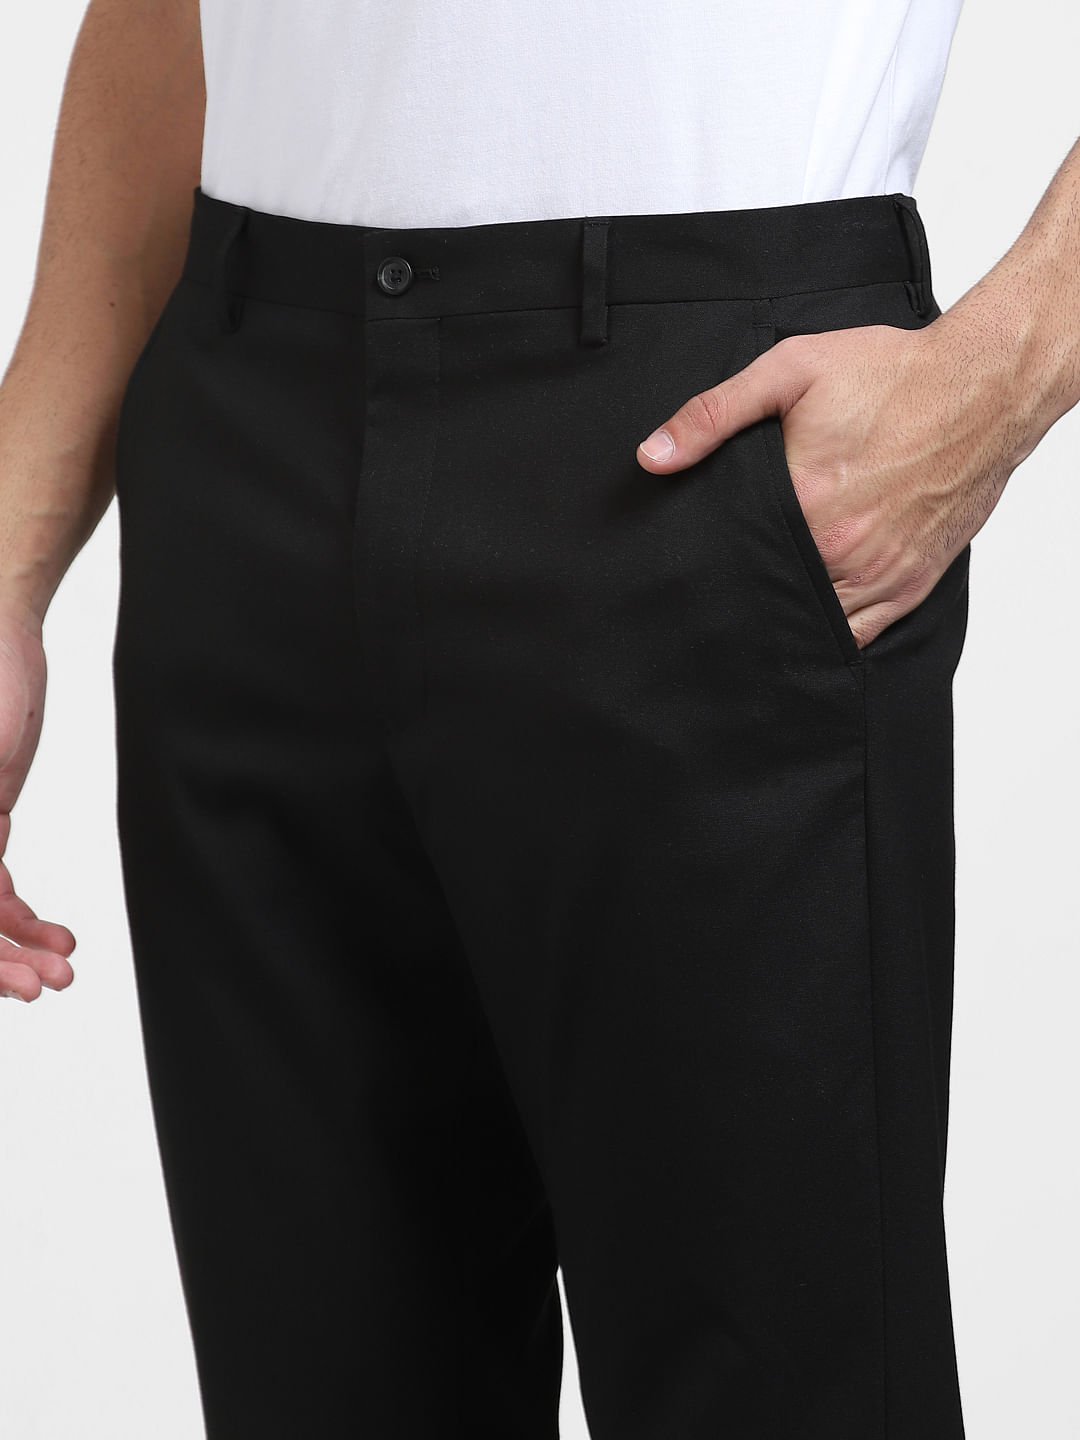 Jeans & Trousers | black formal trousers | Freeup